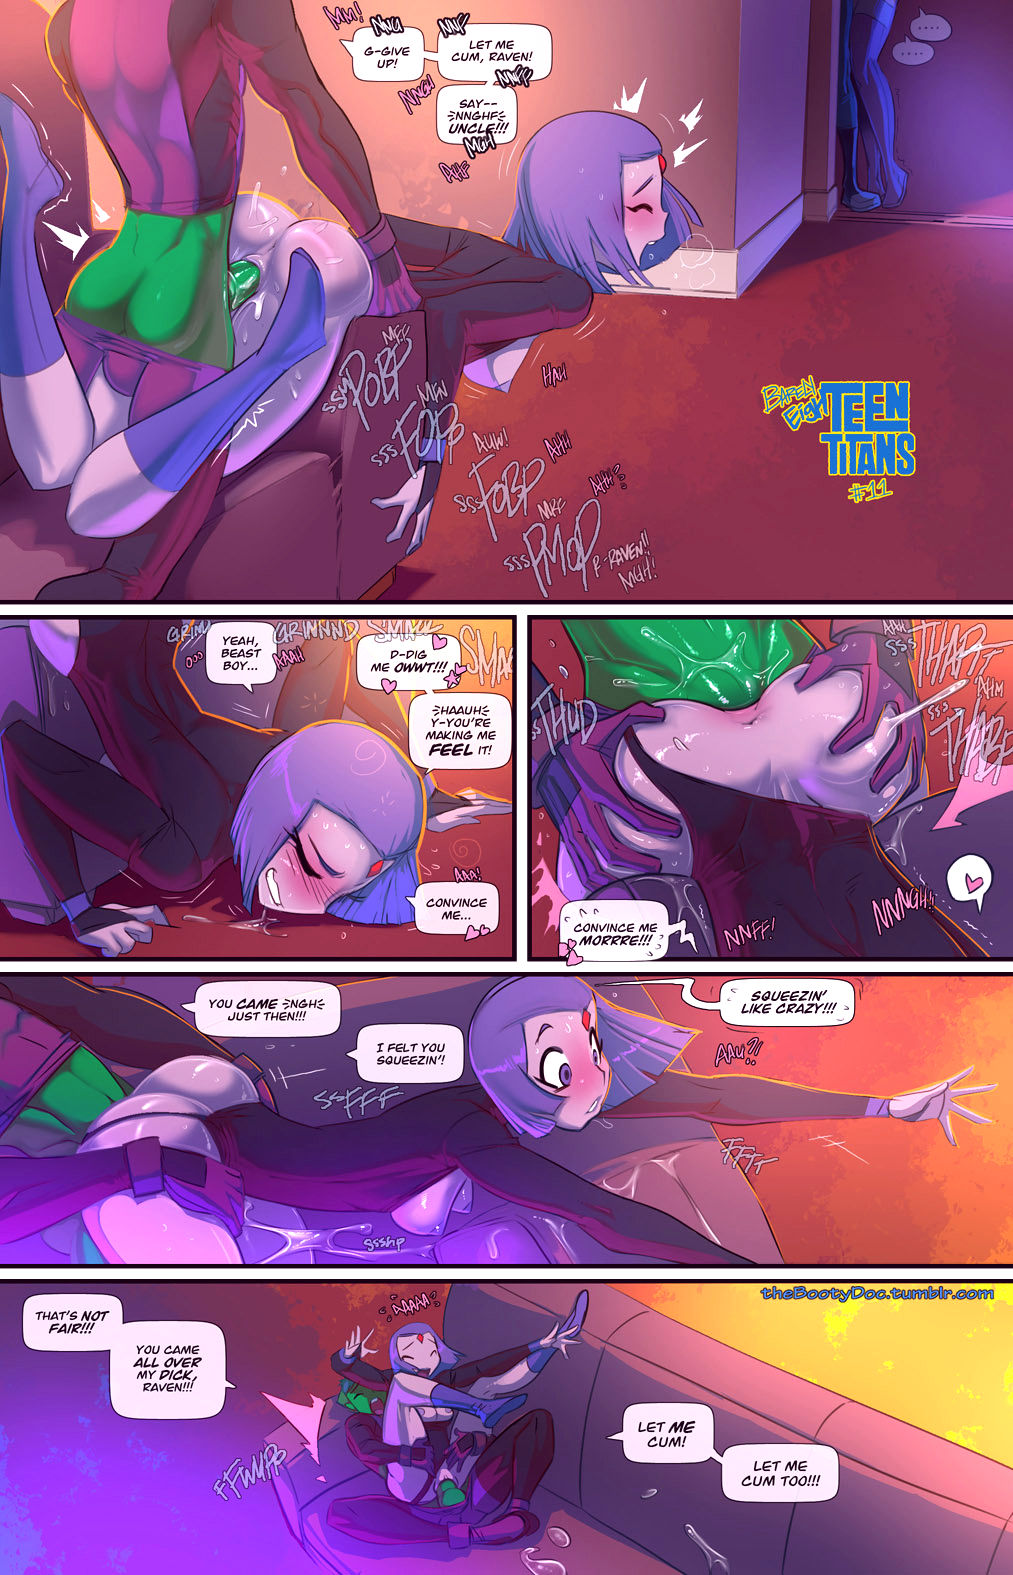 Barely eighteen titans porn comic picture 11